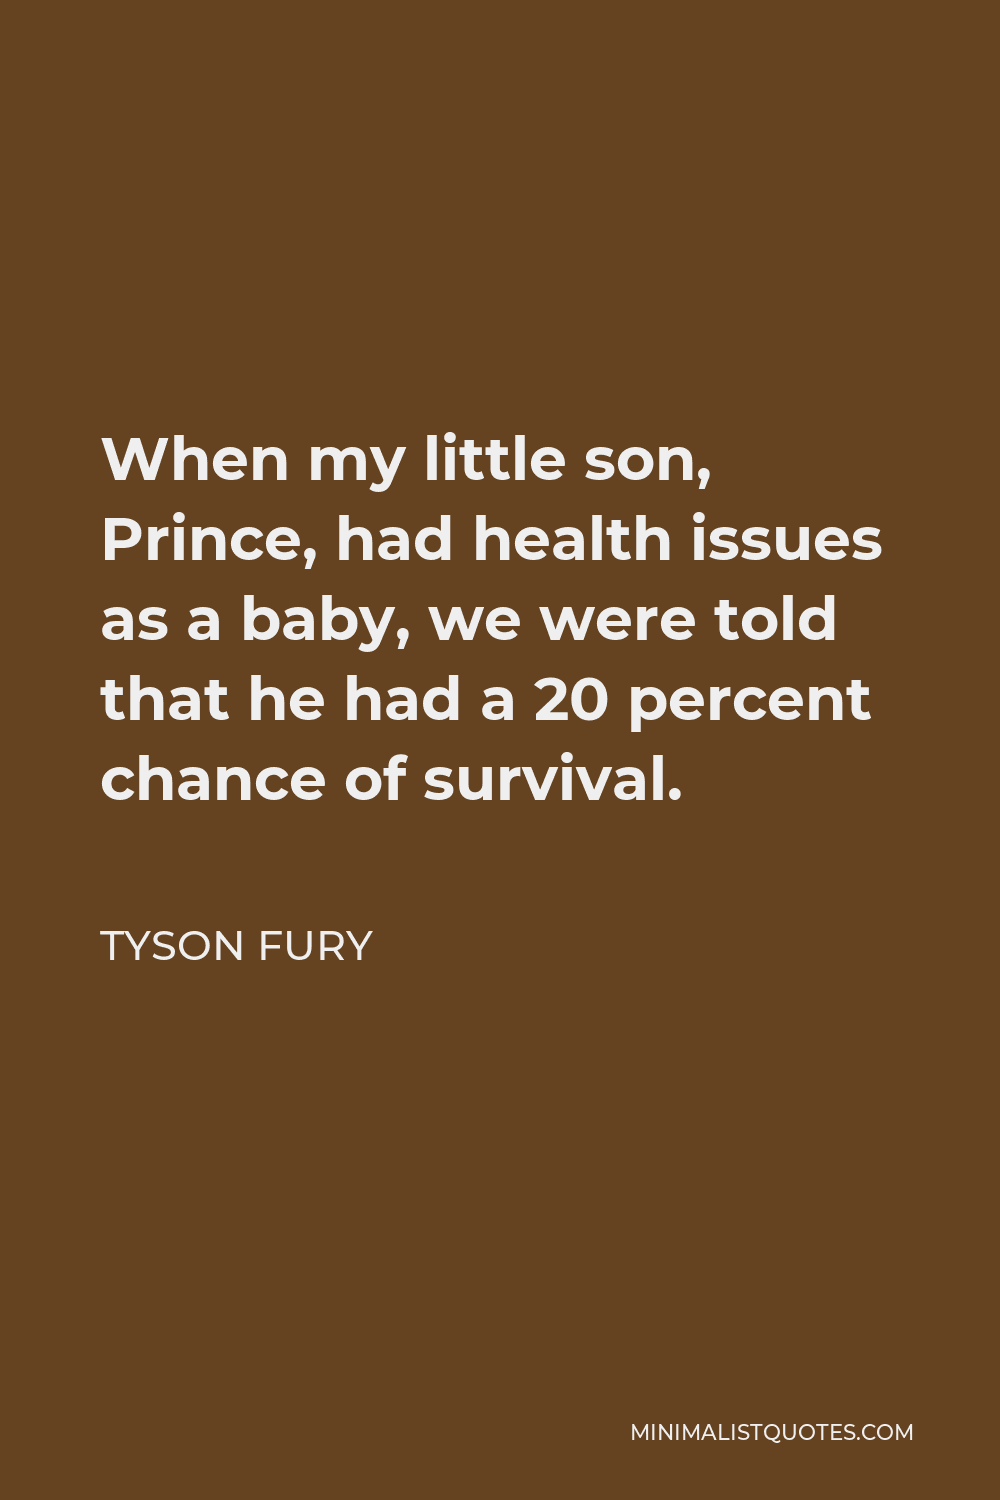 Tyson Fury Quote - When my little son, Prince, had health issues as a baby, we were told that he had a 20 percent chance of survival.